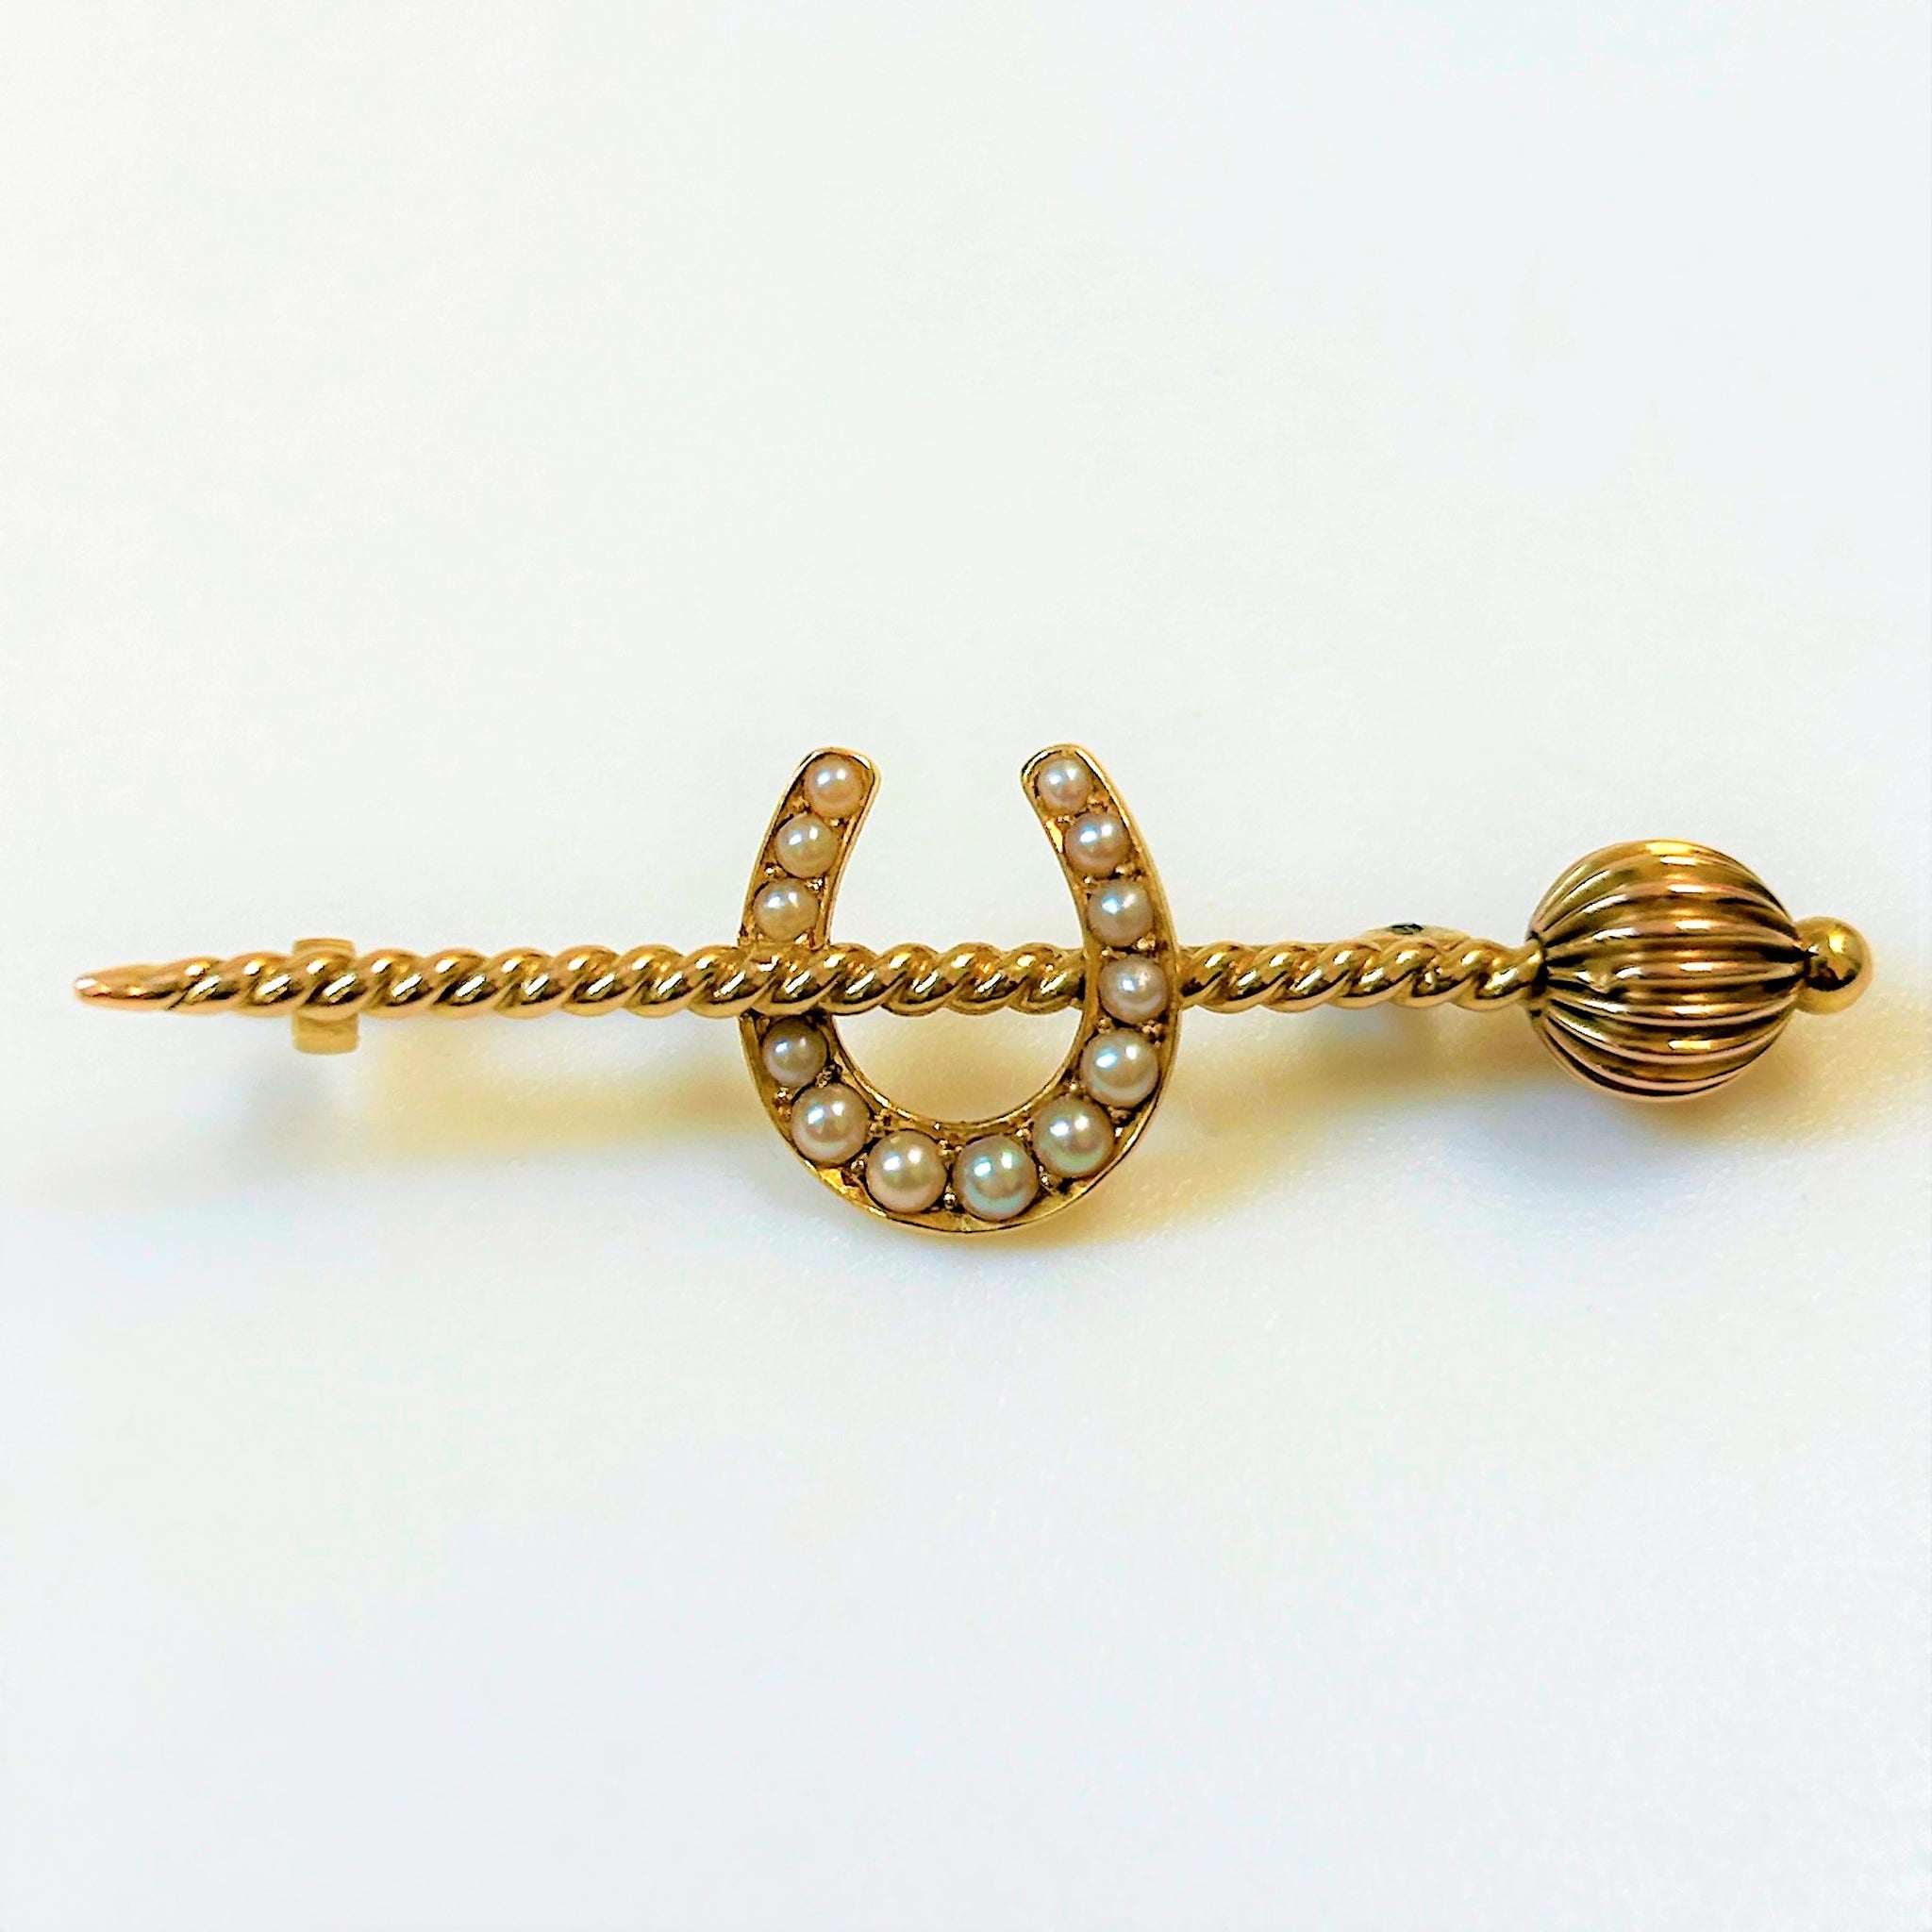 Antique 14ct Gold and Pearl “Lucky Horseshoe” Bar Brooch